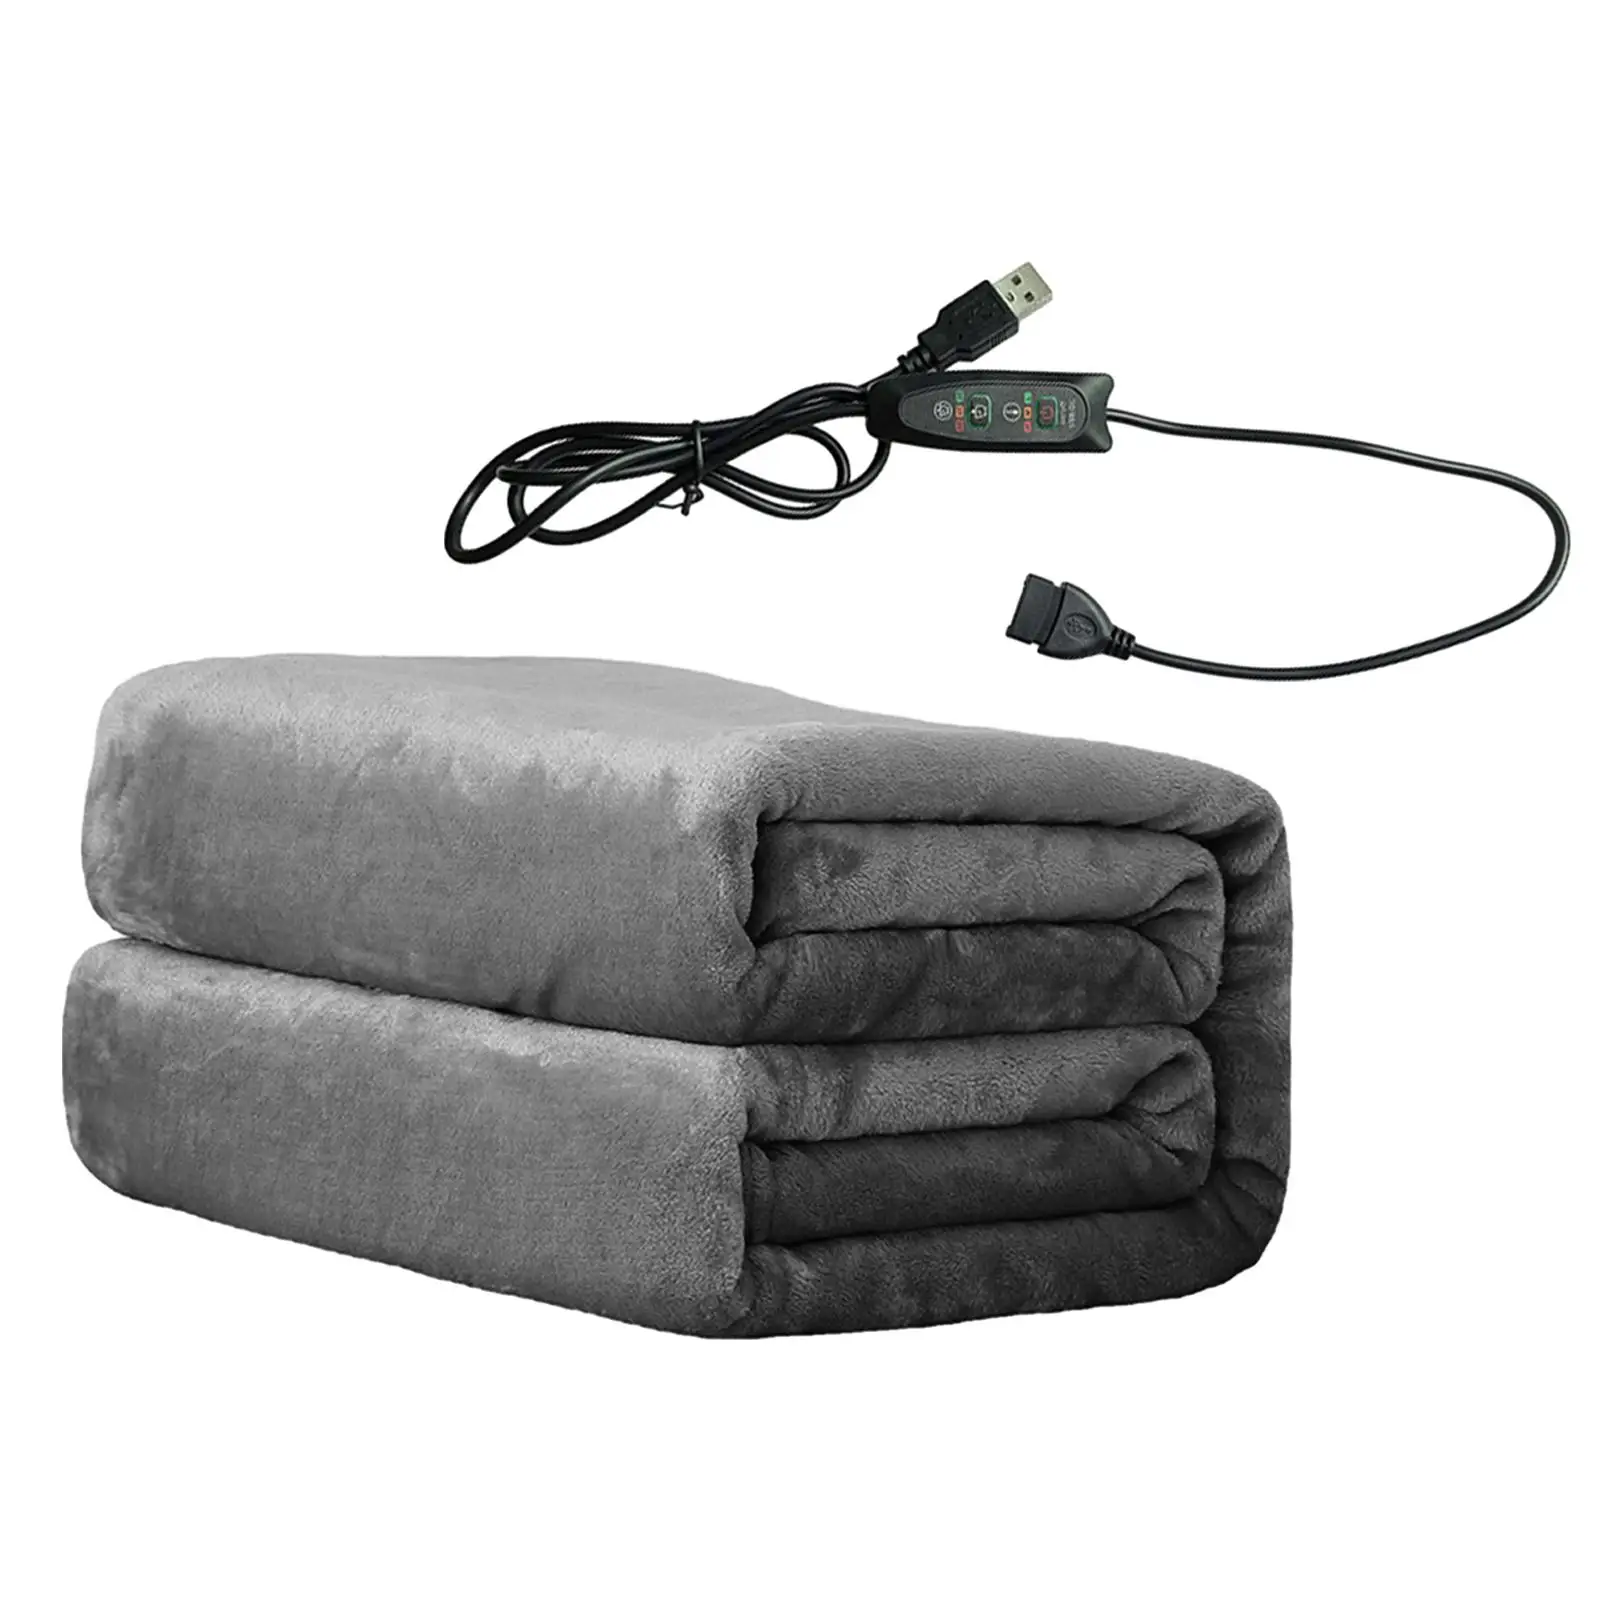 Electric Blanket USB 3 Temperature Control Multifunction Winter Warm Shawl Fast Heating for Hiking Home Traveling Couch Camping